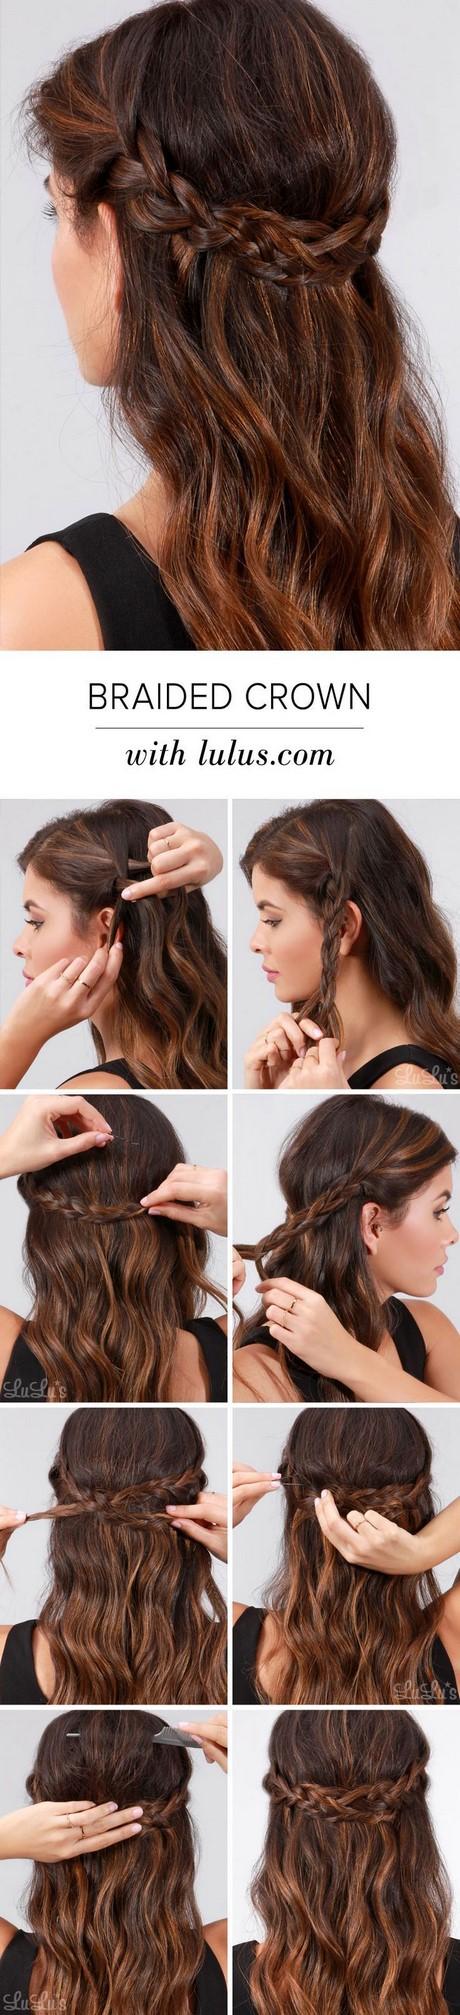 Quick easy braided hairstyles quick-easy-braided-hairstyles-24_11